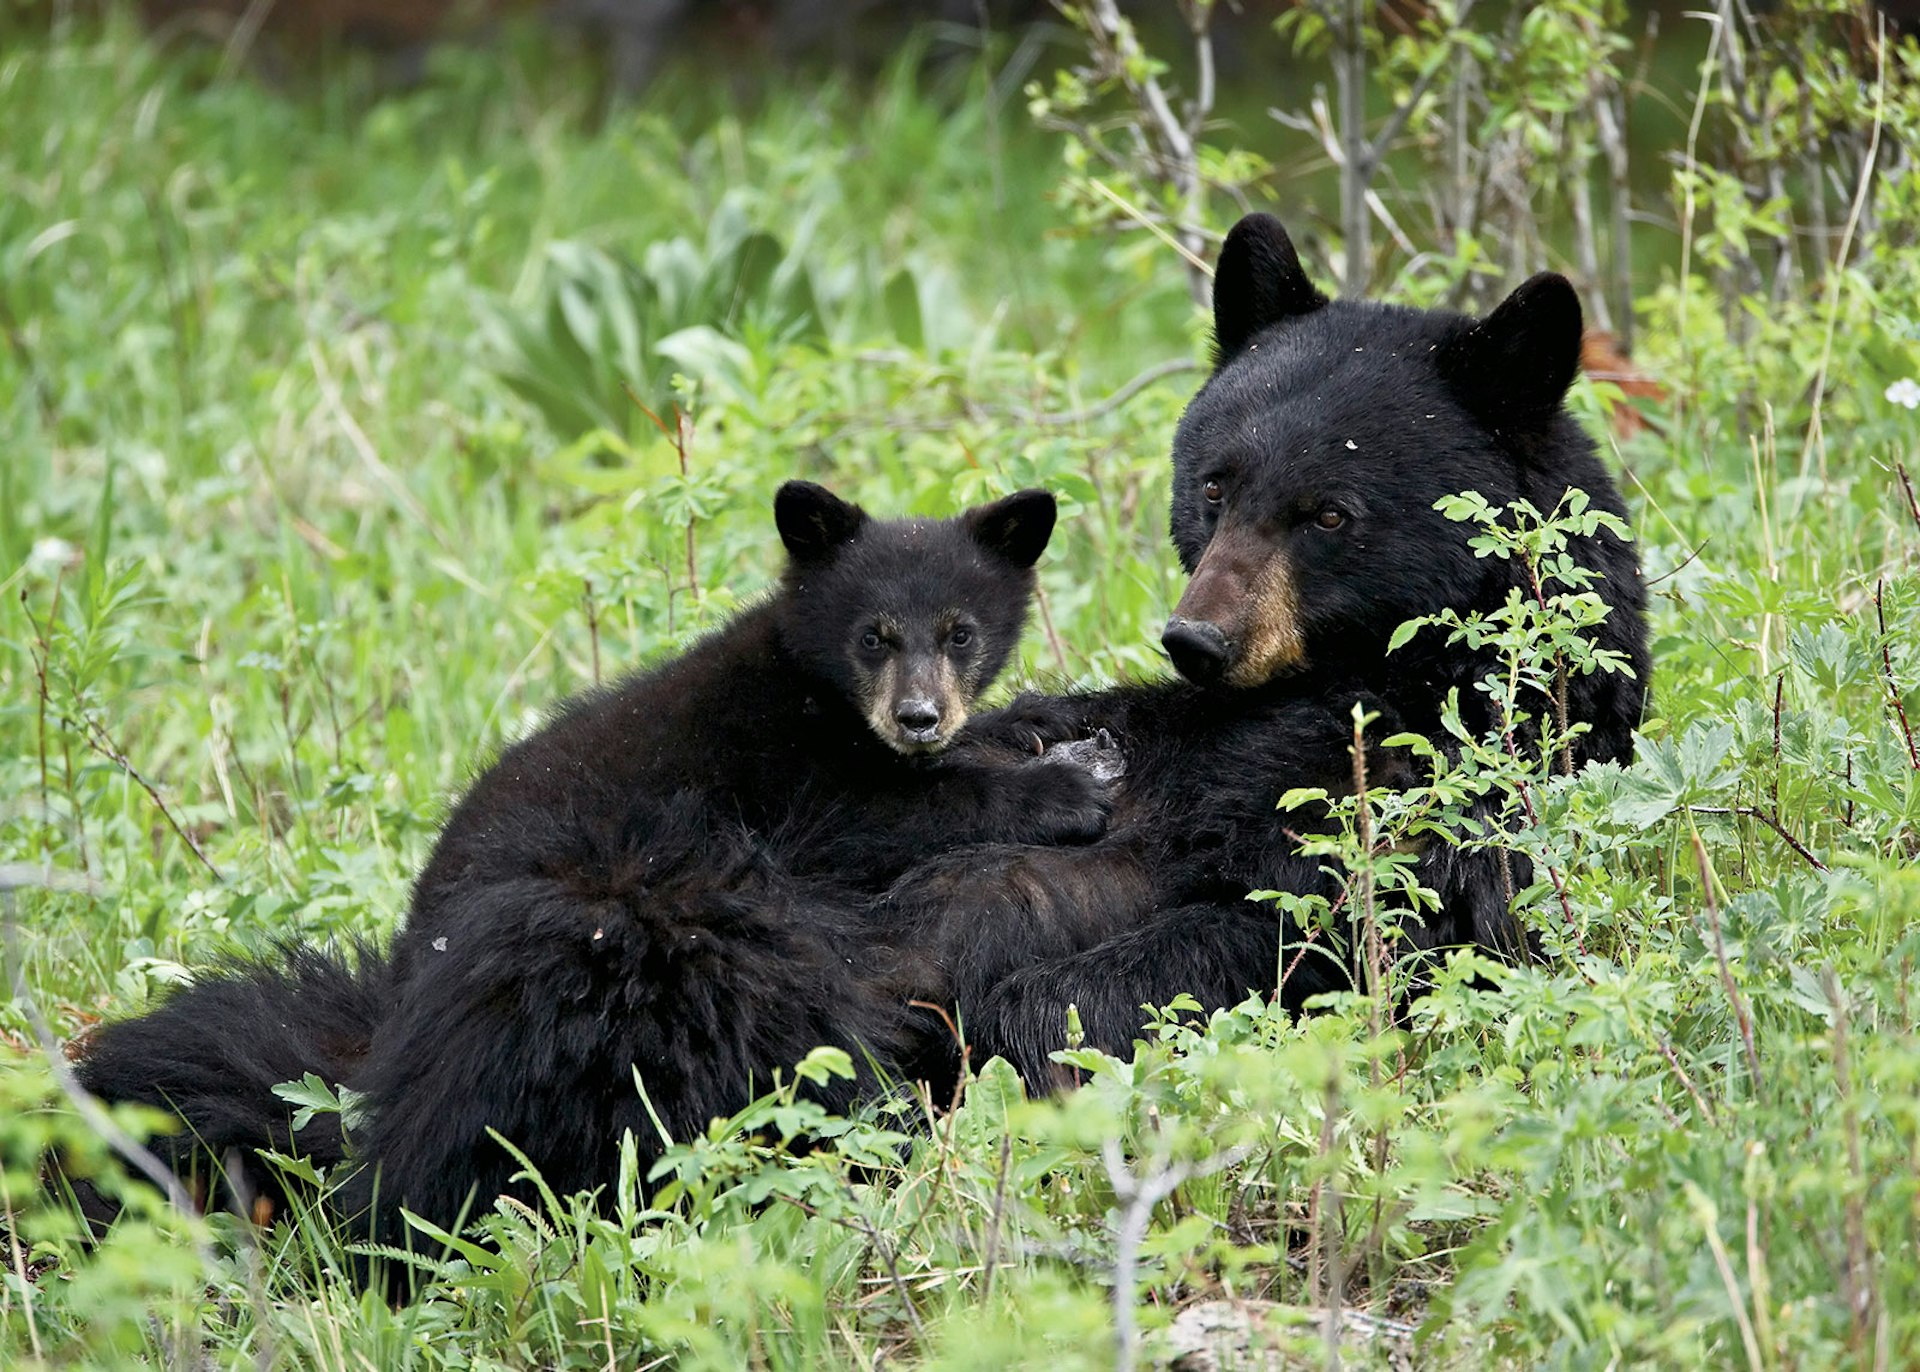 A bear with its cub in Yellowstone National Park © Matt Munro / Lonely Planet